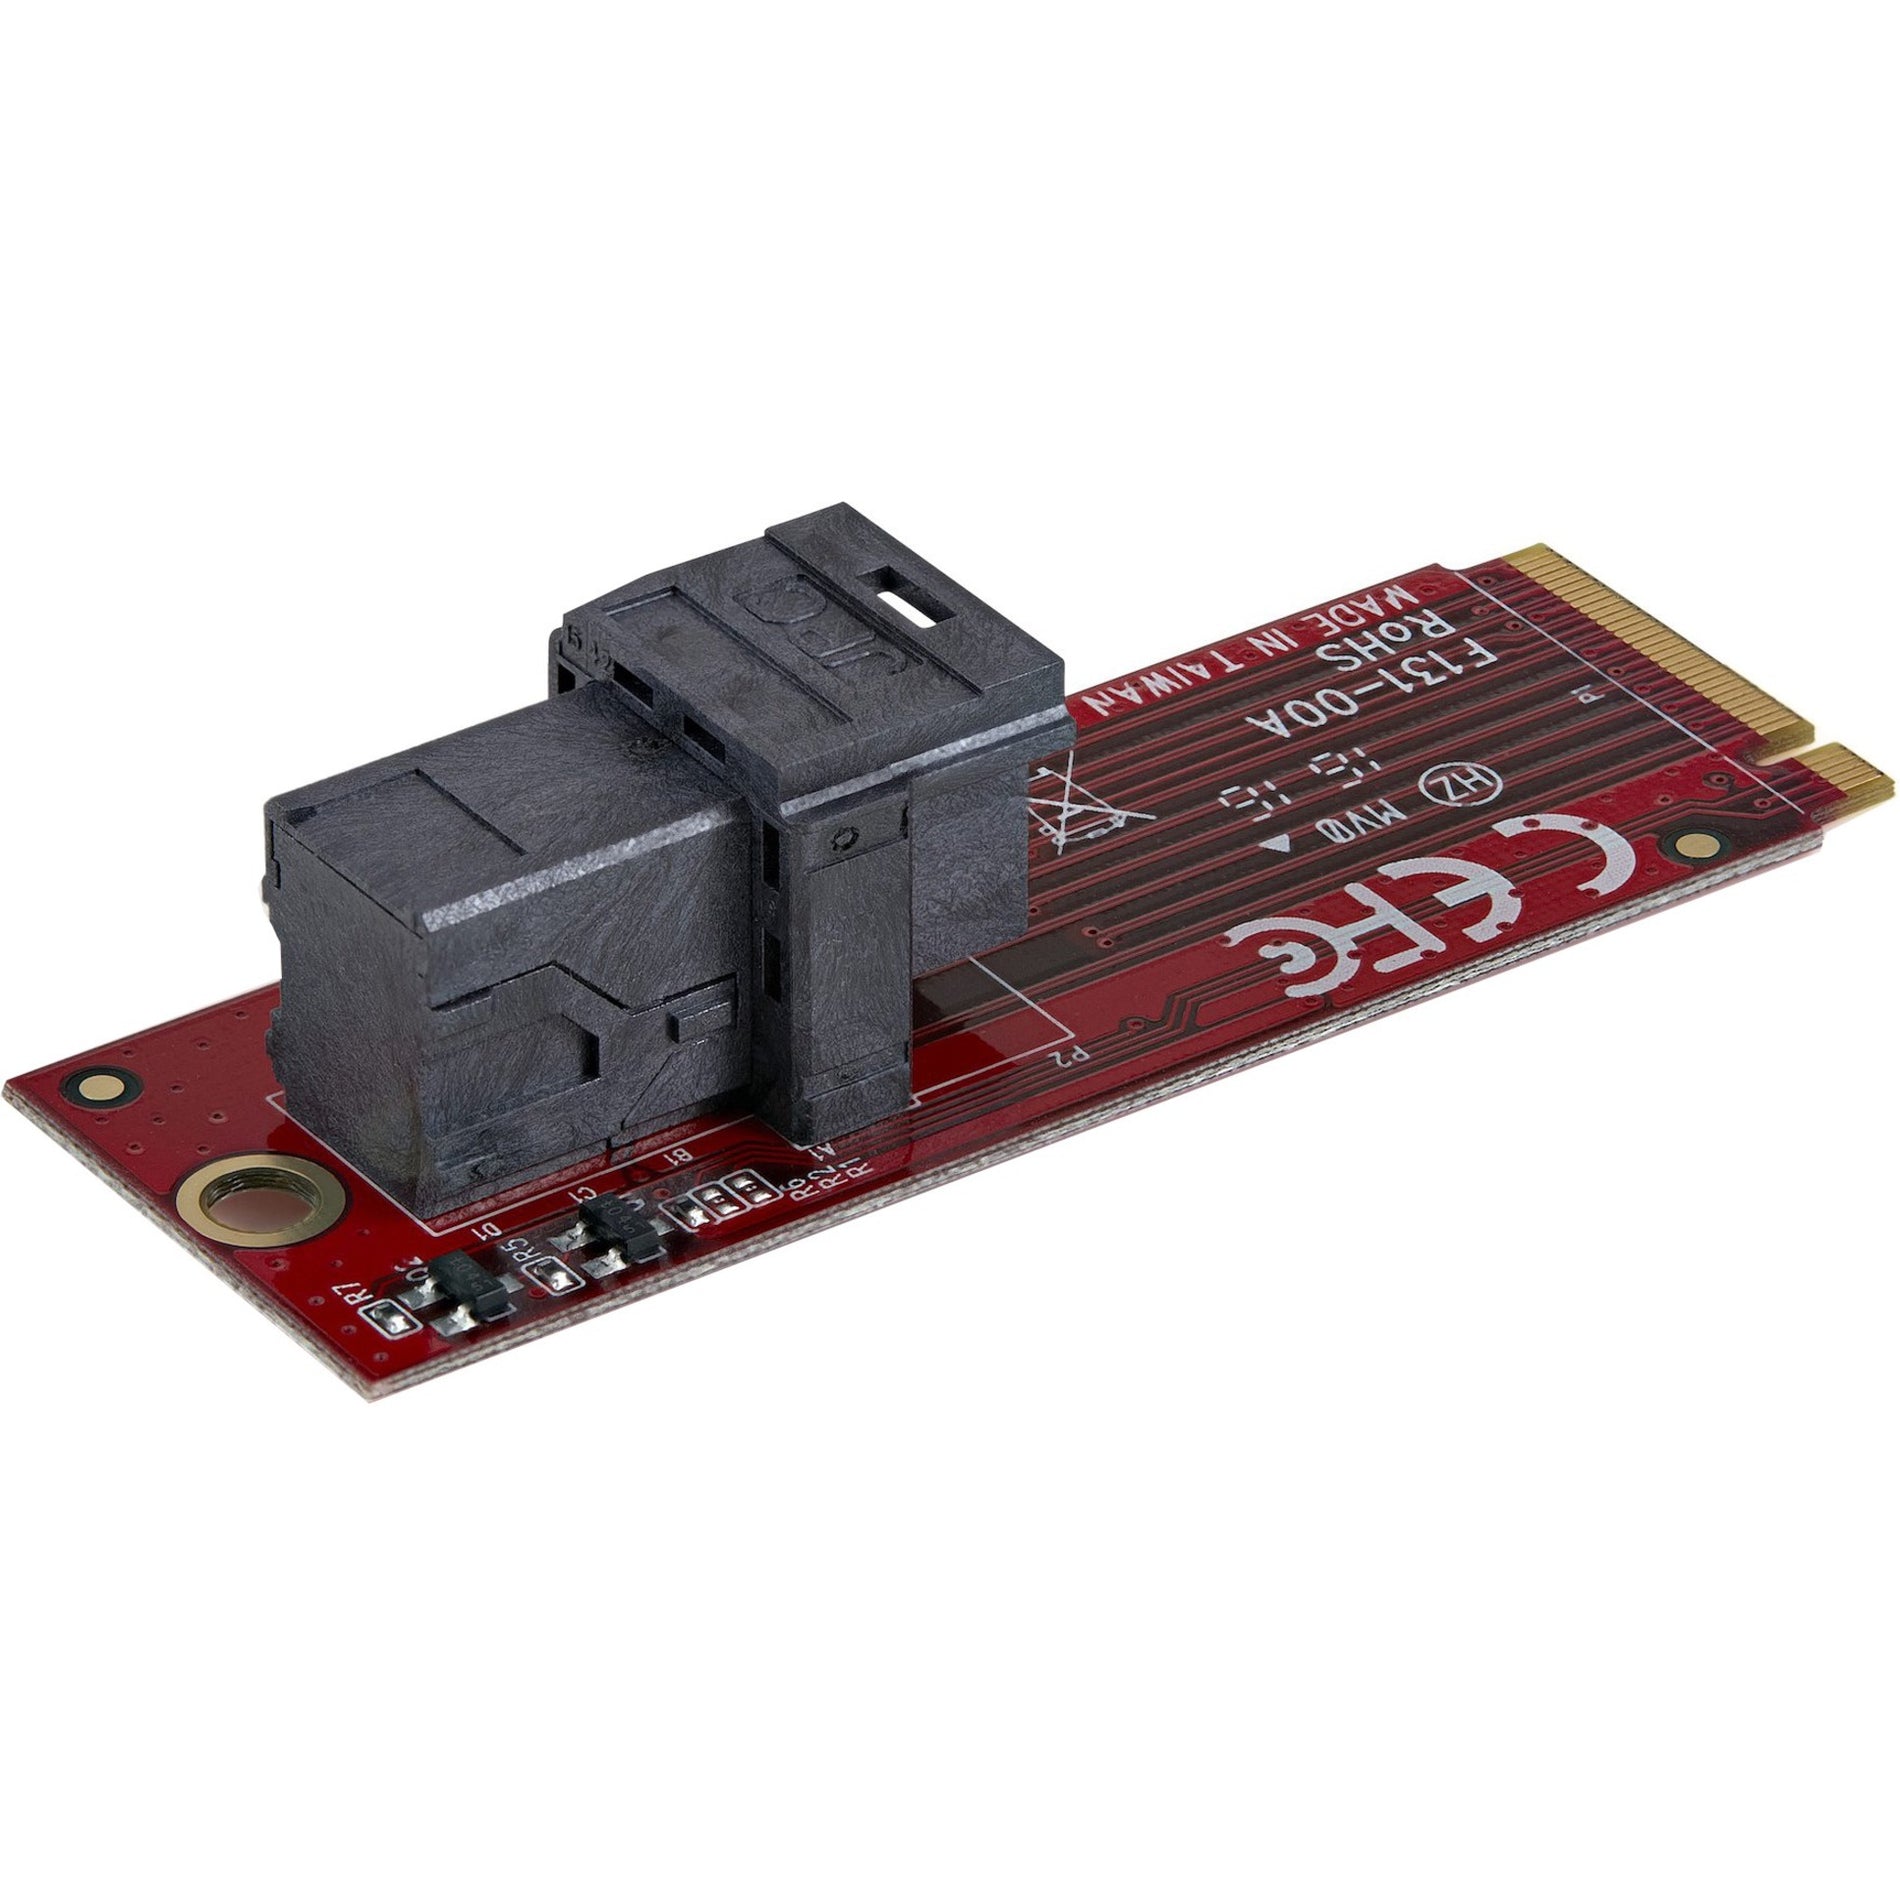 StarTech.com M2E4SFF8643 U.2 to M.2 Adapter for U.2 NVMe SSD, PCIe x4 Host Interface, Red